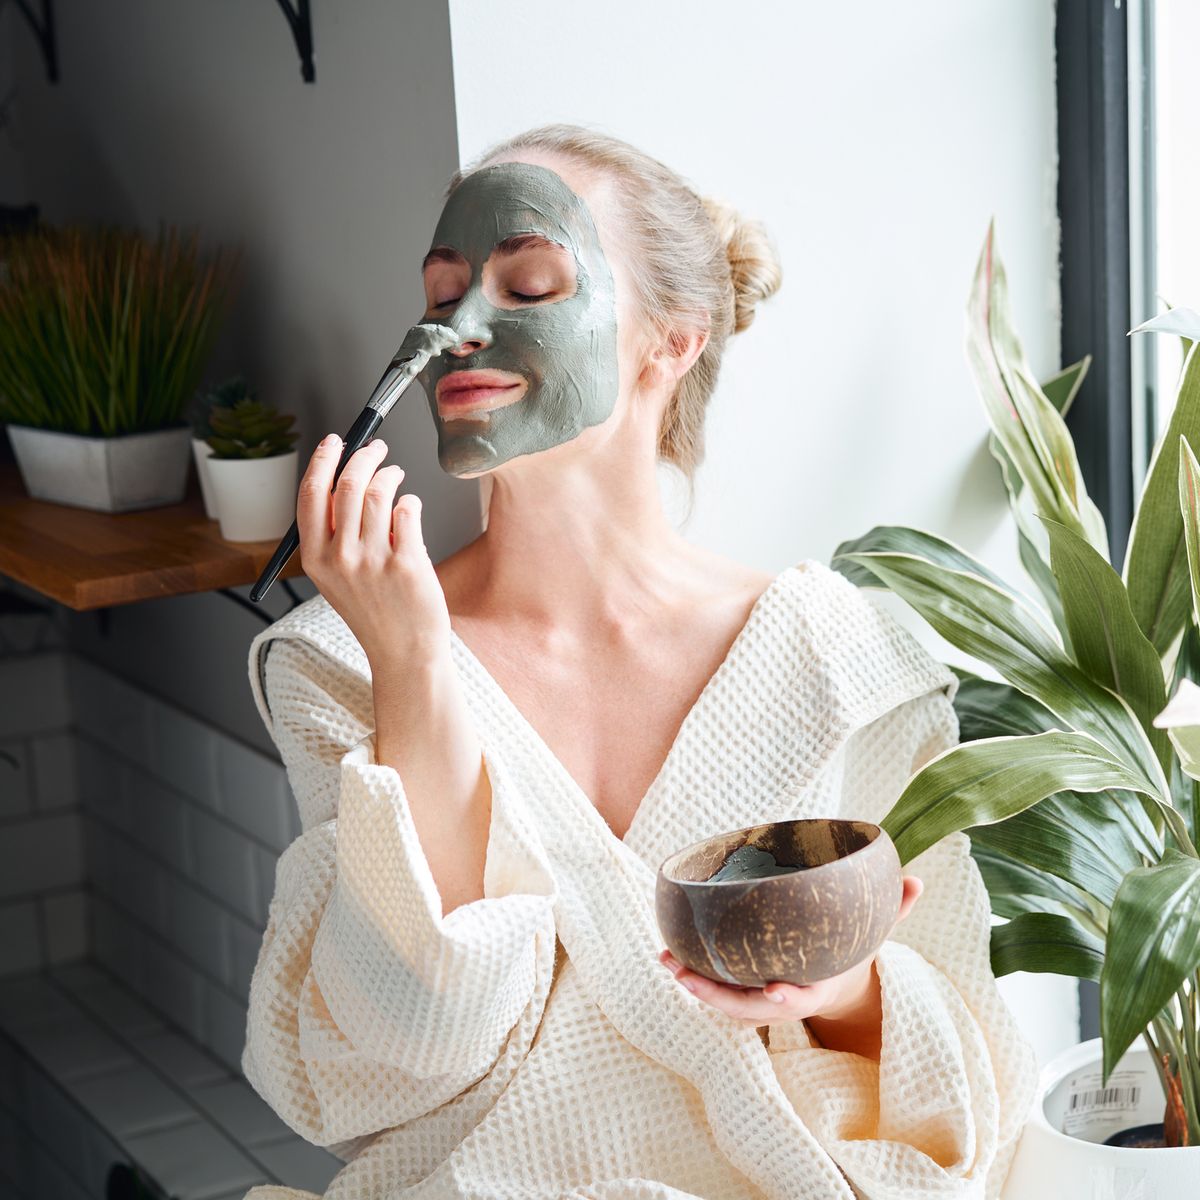 https://hips.hearstapps.com/hmg-prod/images/woman-enjoying-skin-care-treatment-at-home-royalty-free-image-1671634815.jpg?crop=0.667xw:1.00xh;0.138xw,0&resize=1200:*